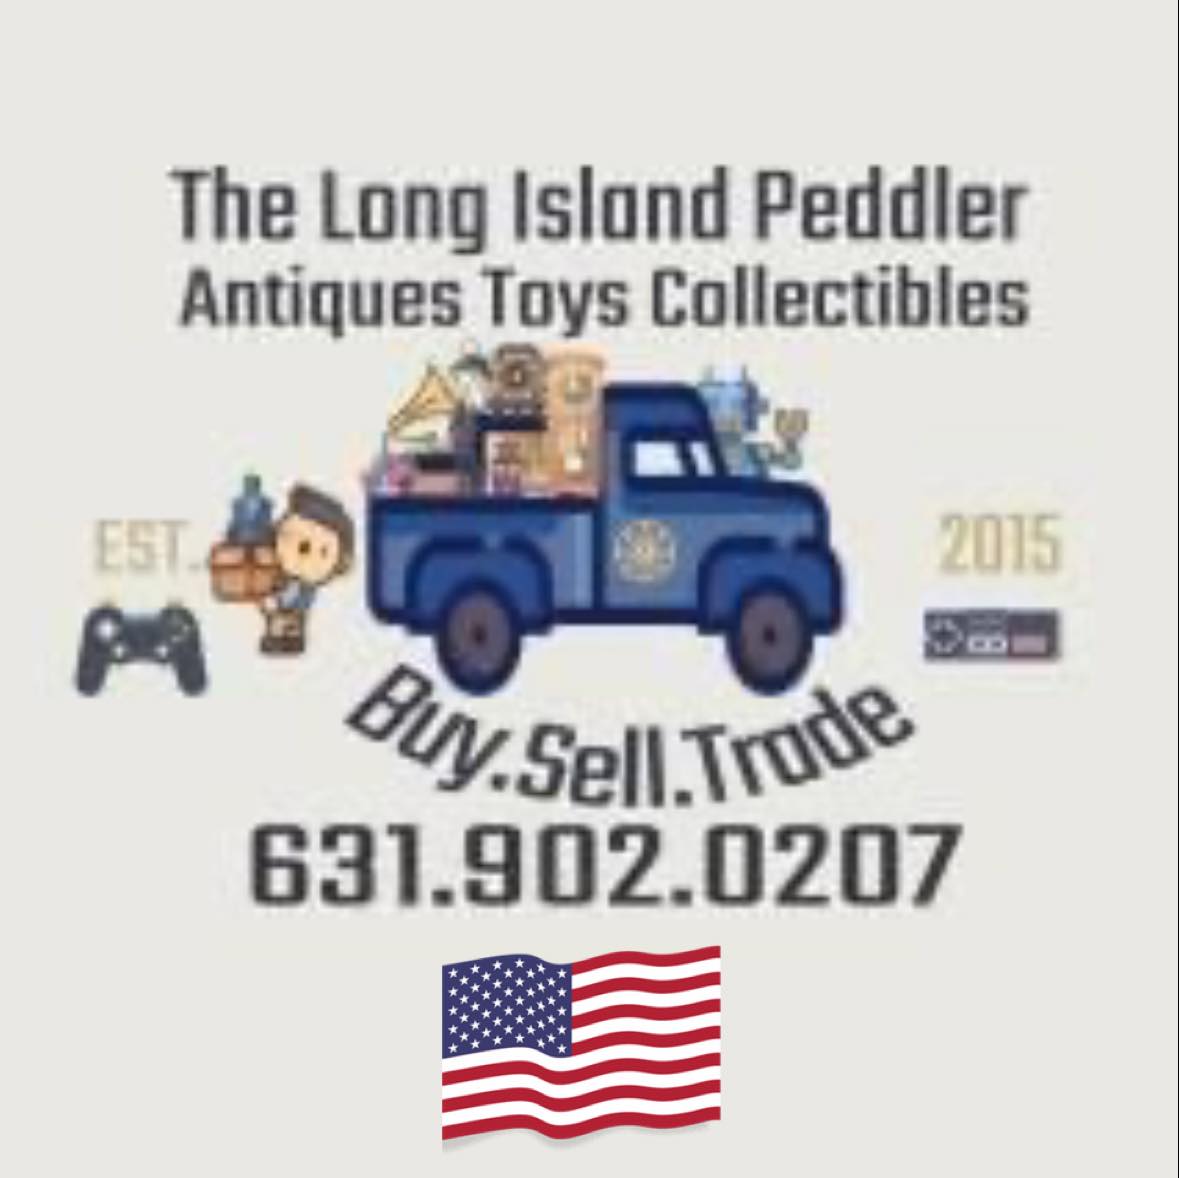 The Long Island Peddler review